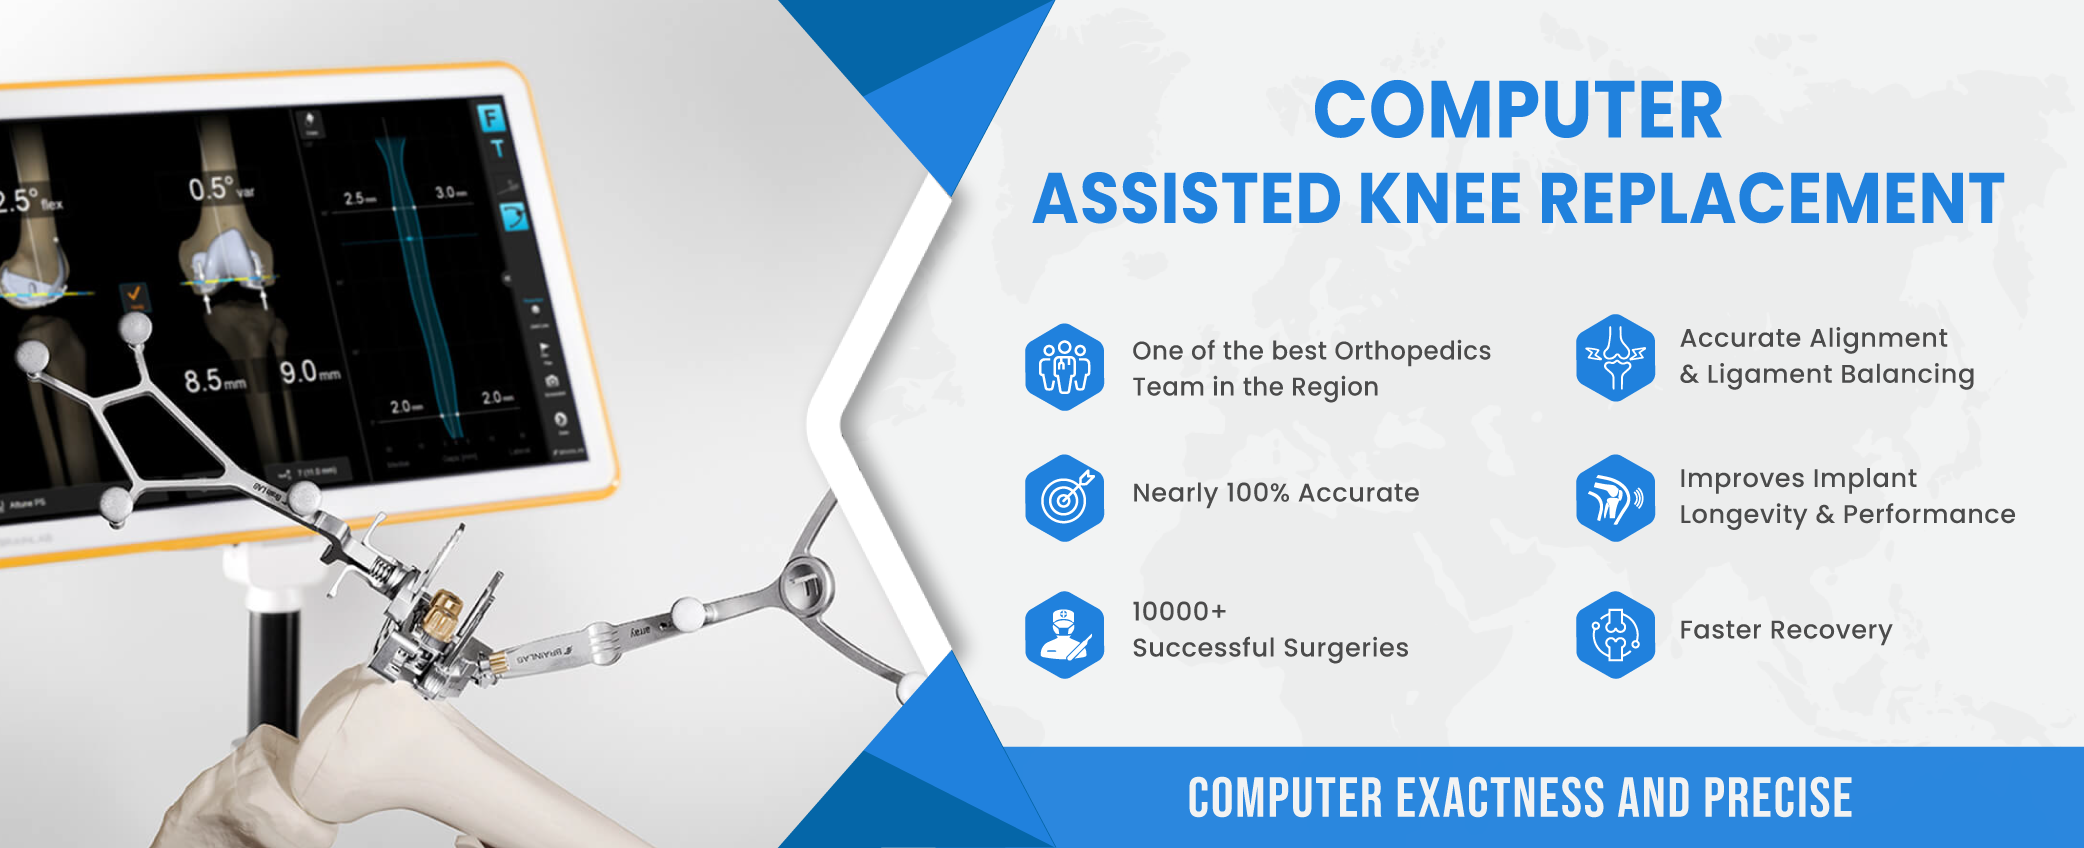 Computer Assisted Knee Replacement in Jaipur, India